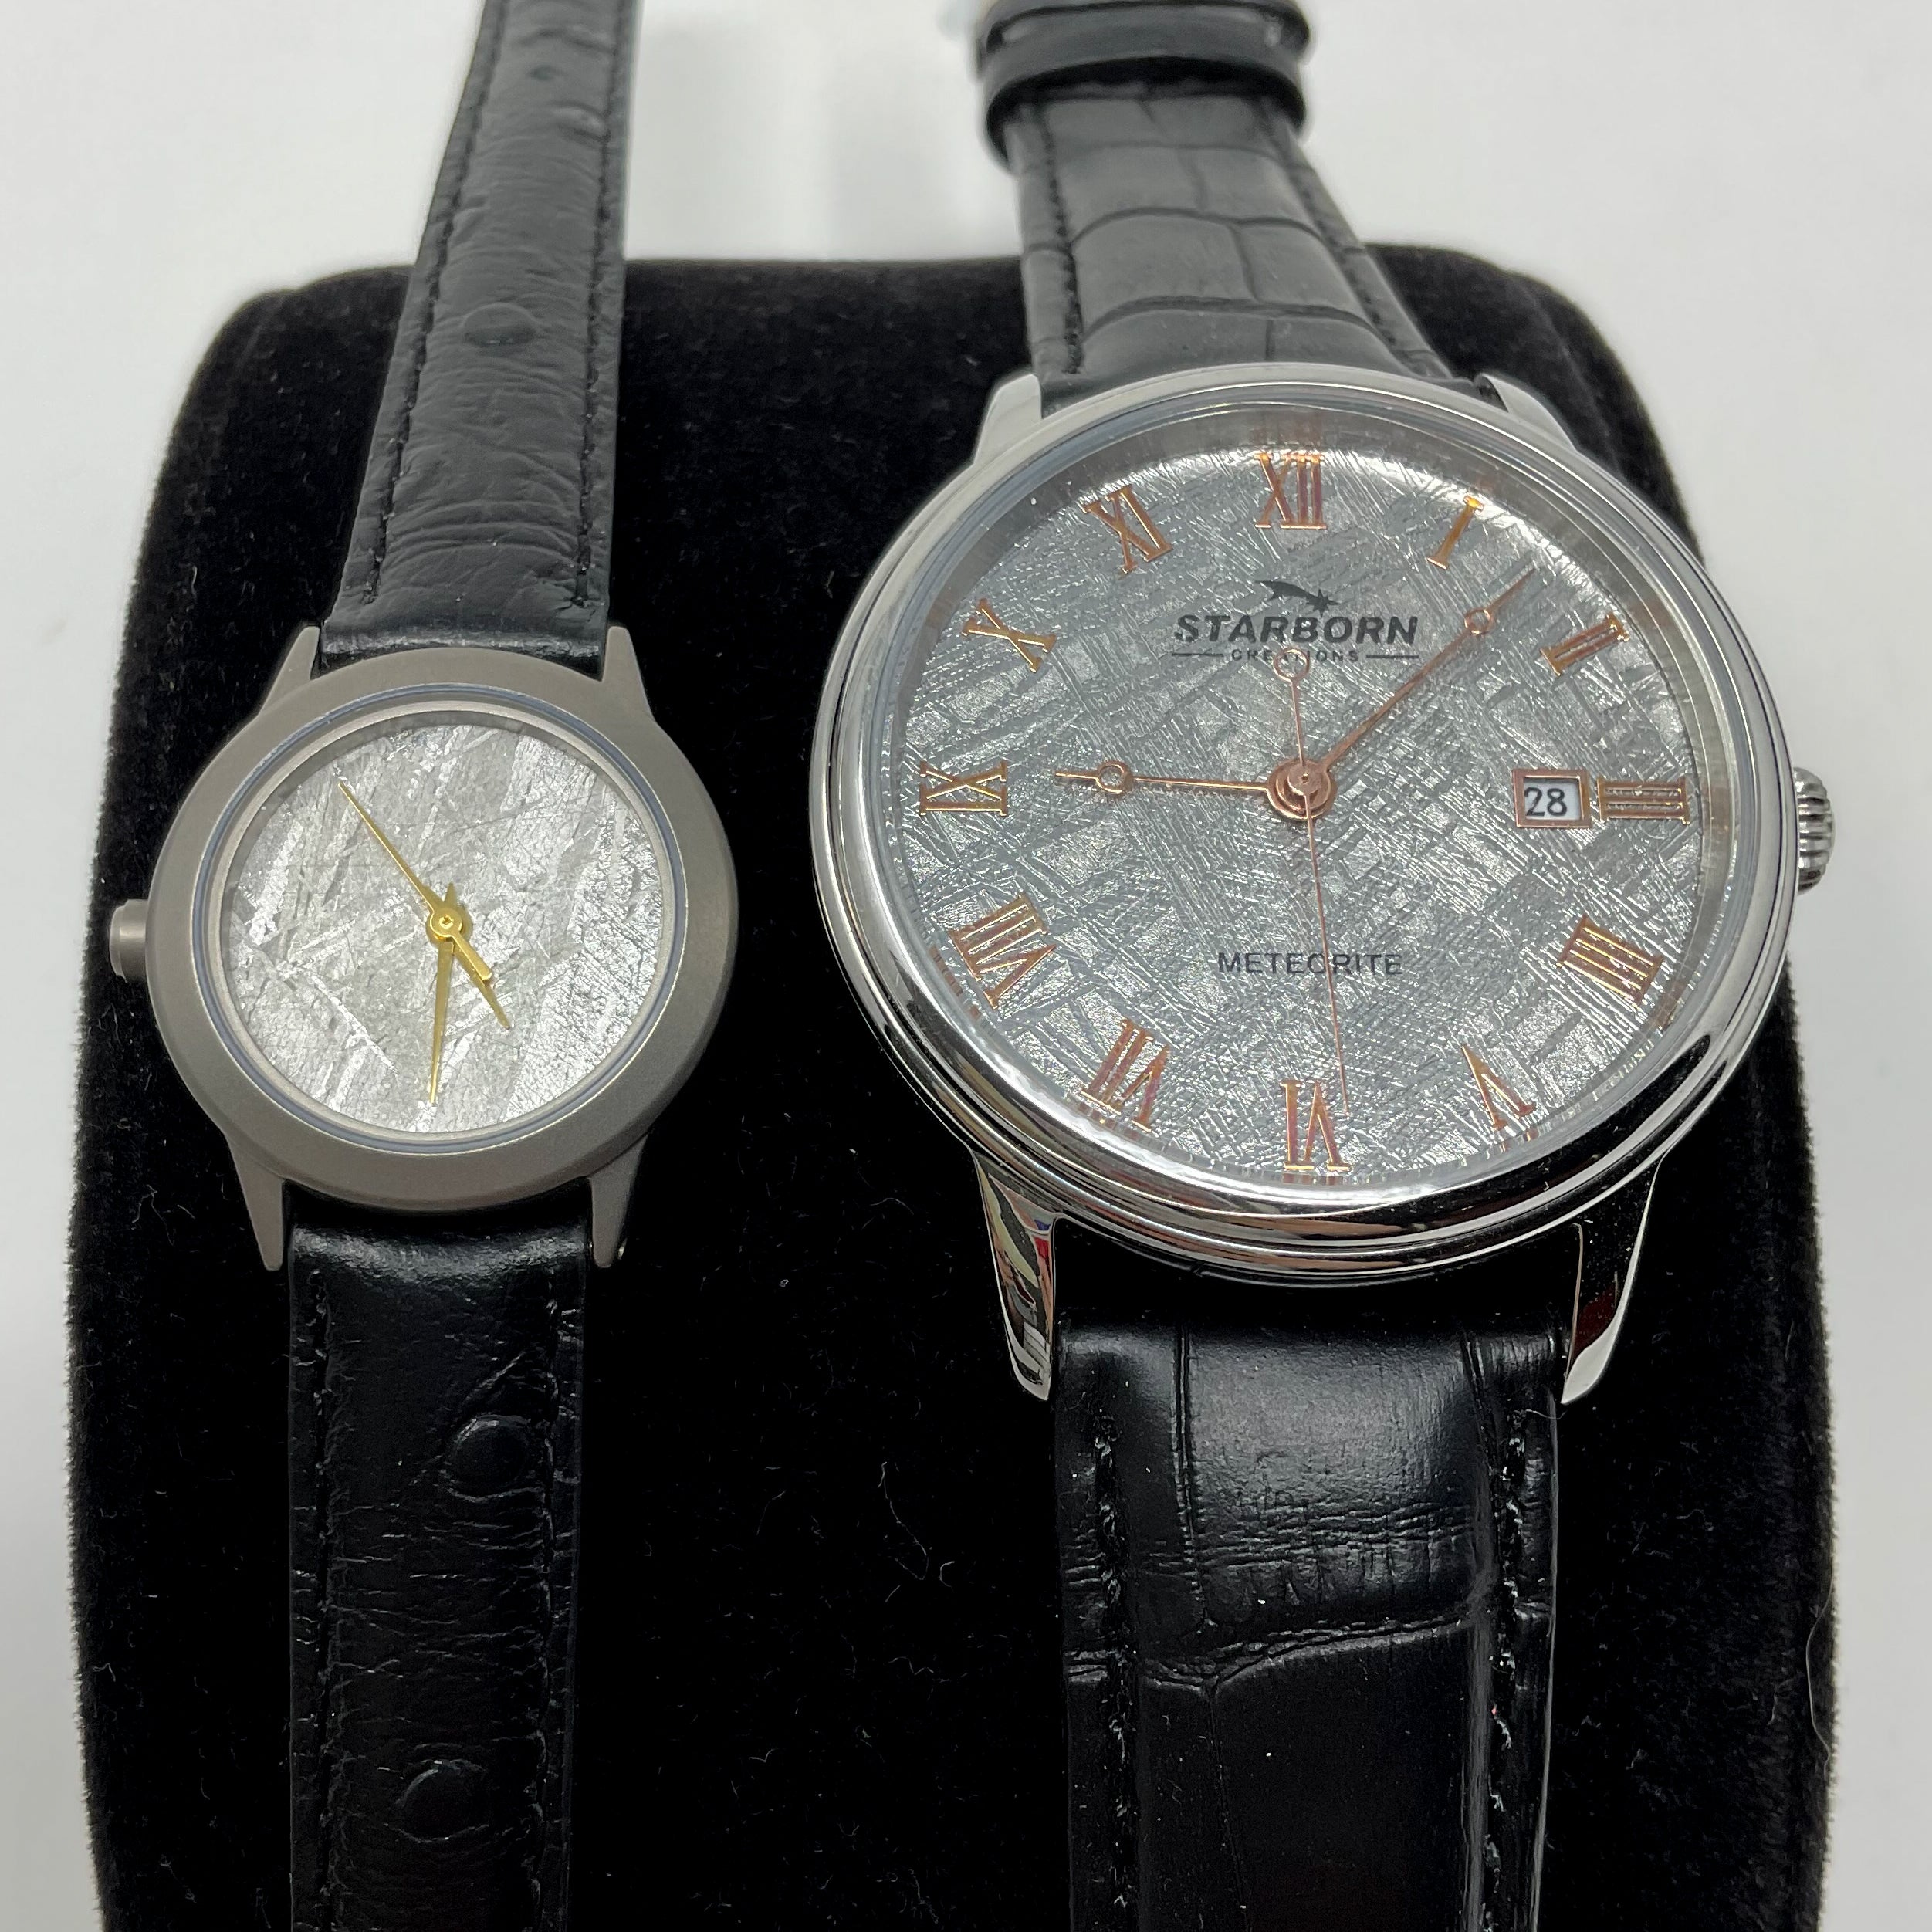 How are meteorite watch dials made? - Quora